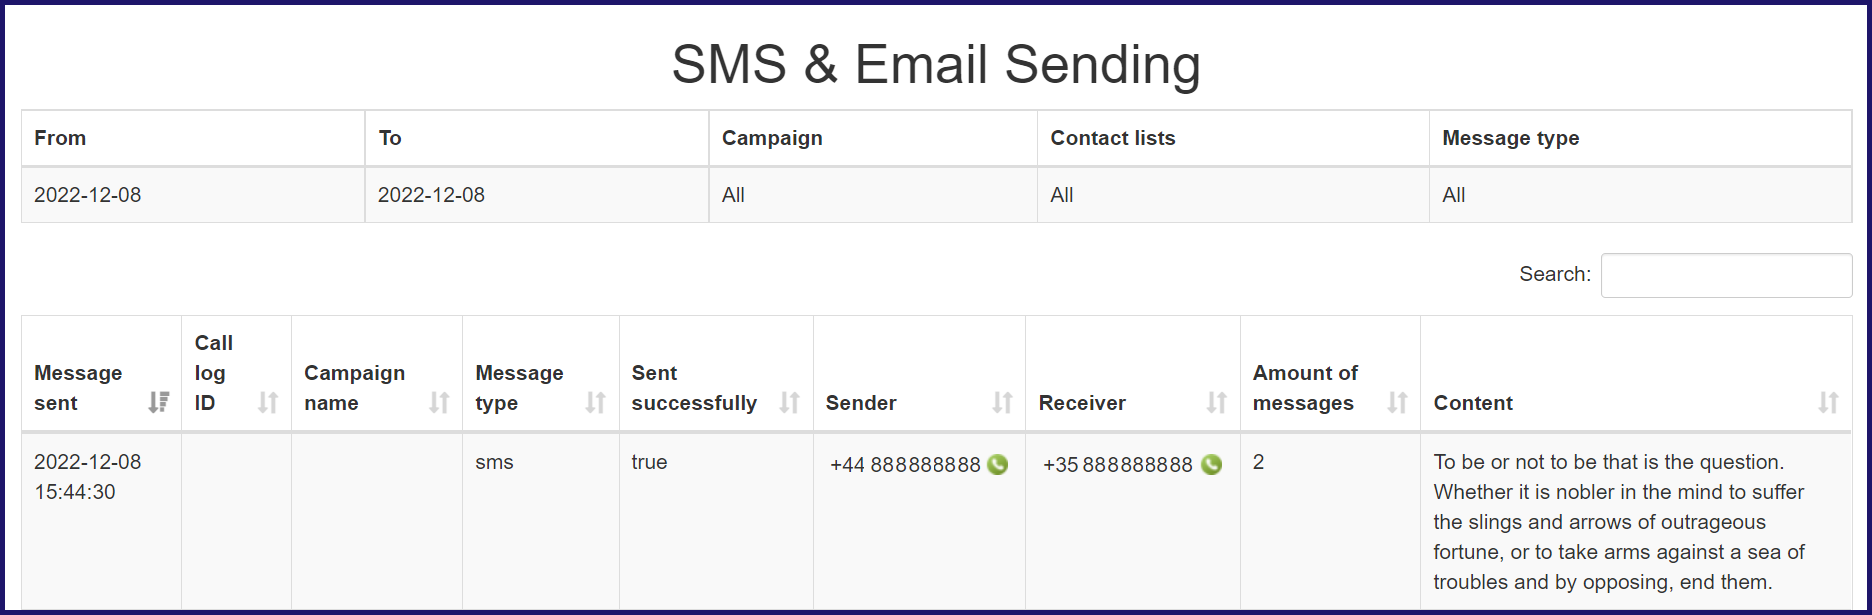 SMS_Email_Sending.png